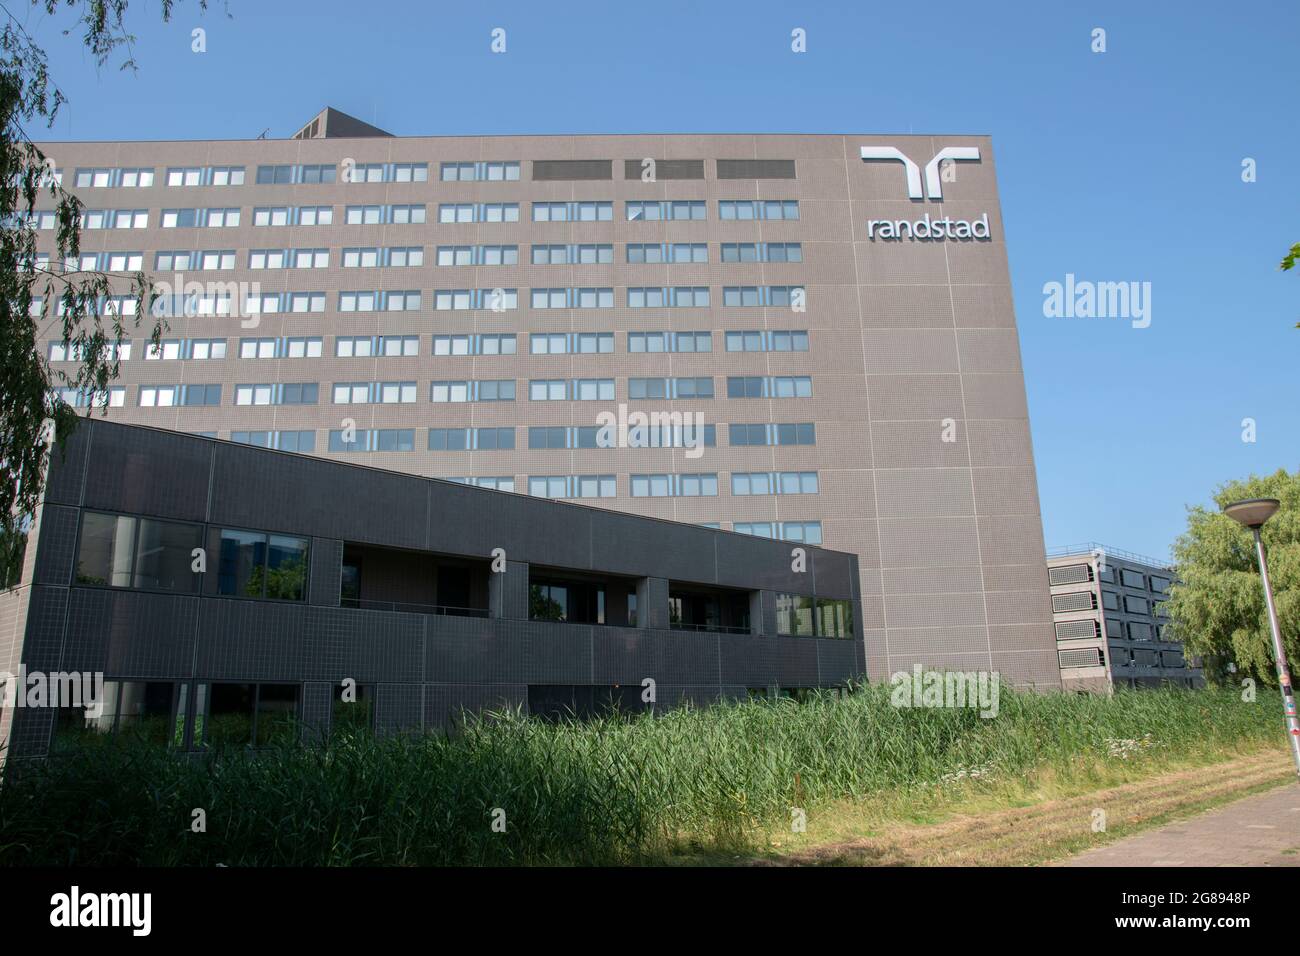 Randstad Building At Amsterdam The Netherlands 17-7-2021 Stock Photo - Alamy